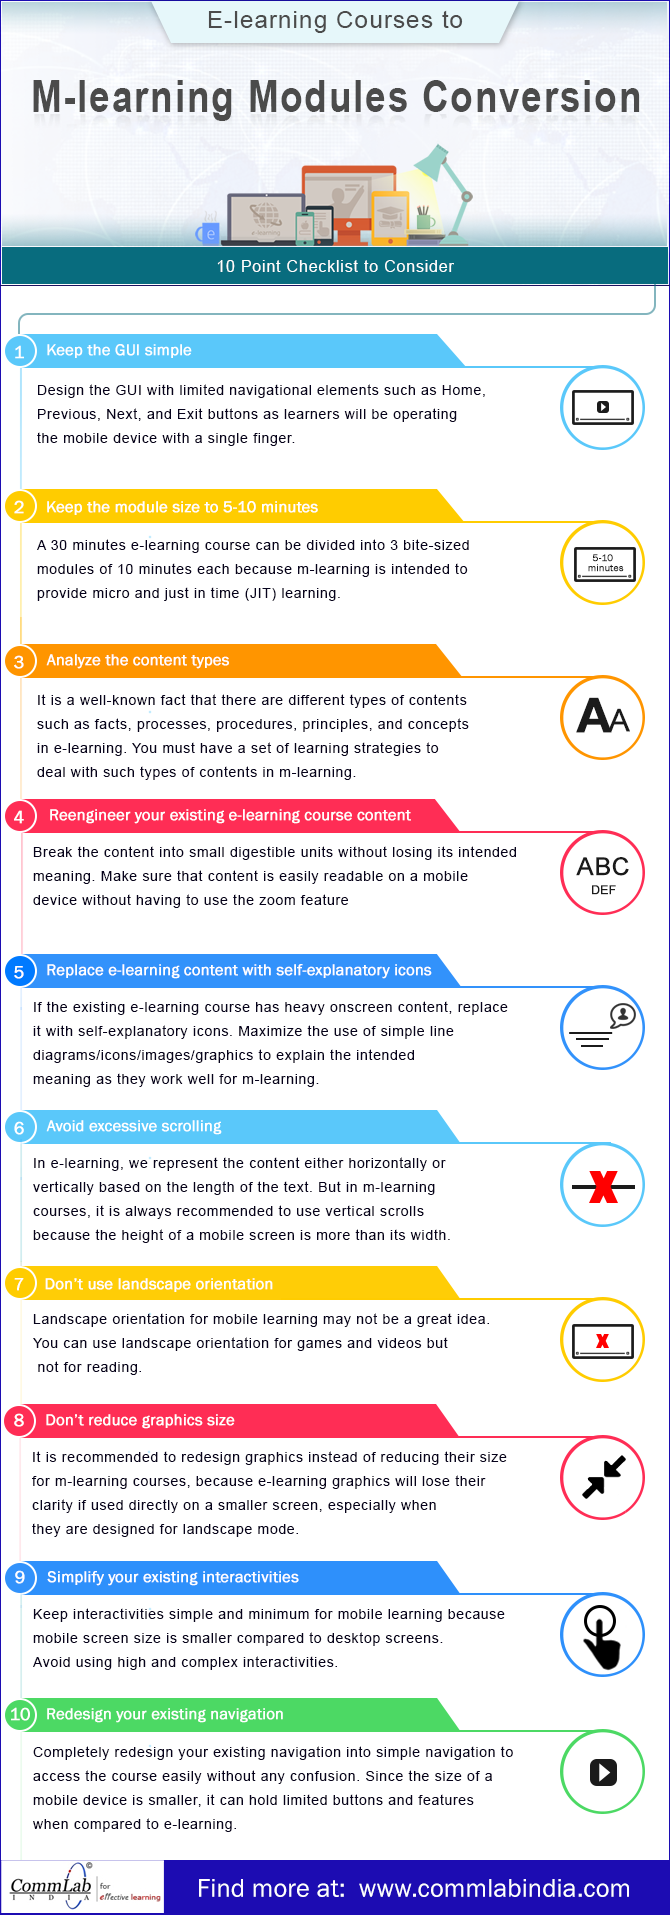 Making E-learning Content Mobile Compatible - A Few Aspects to Consider [Infographic]